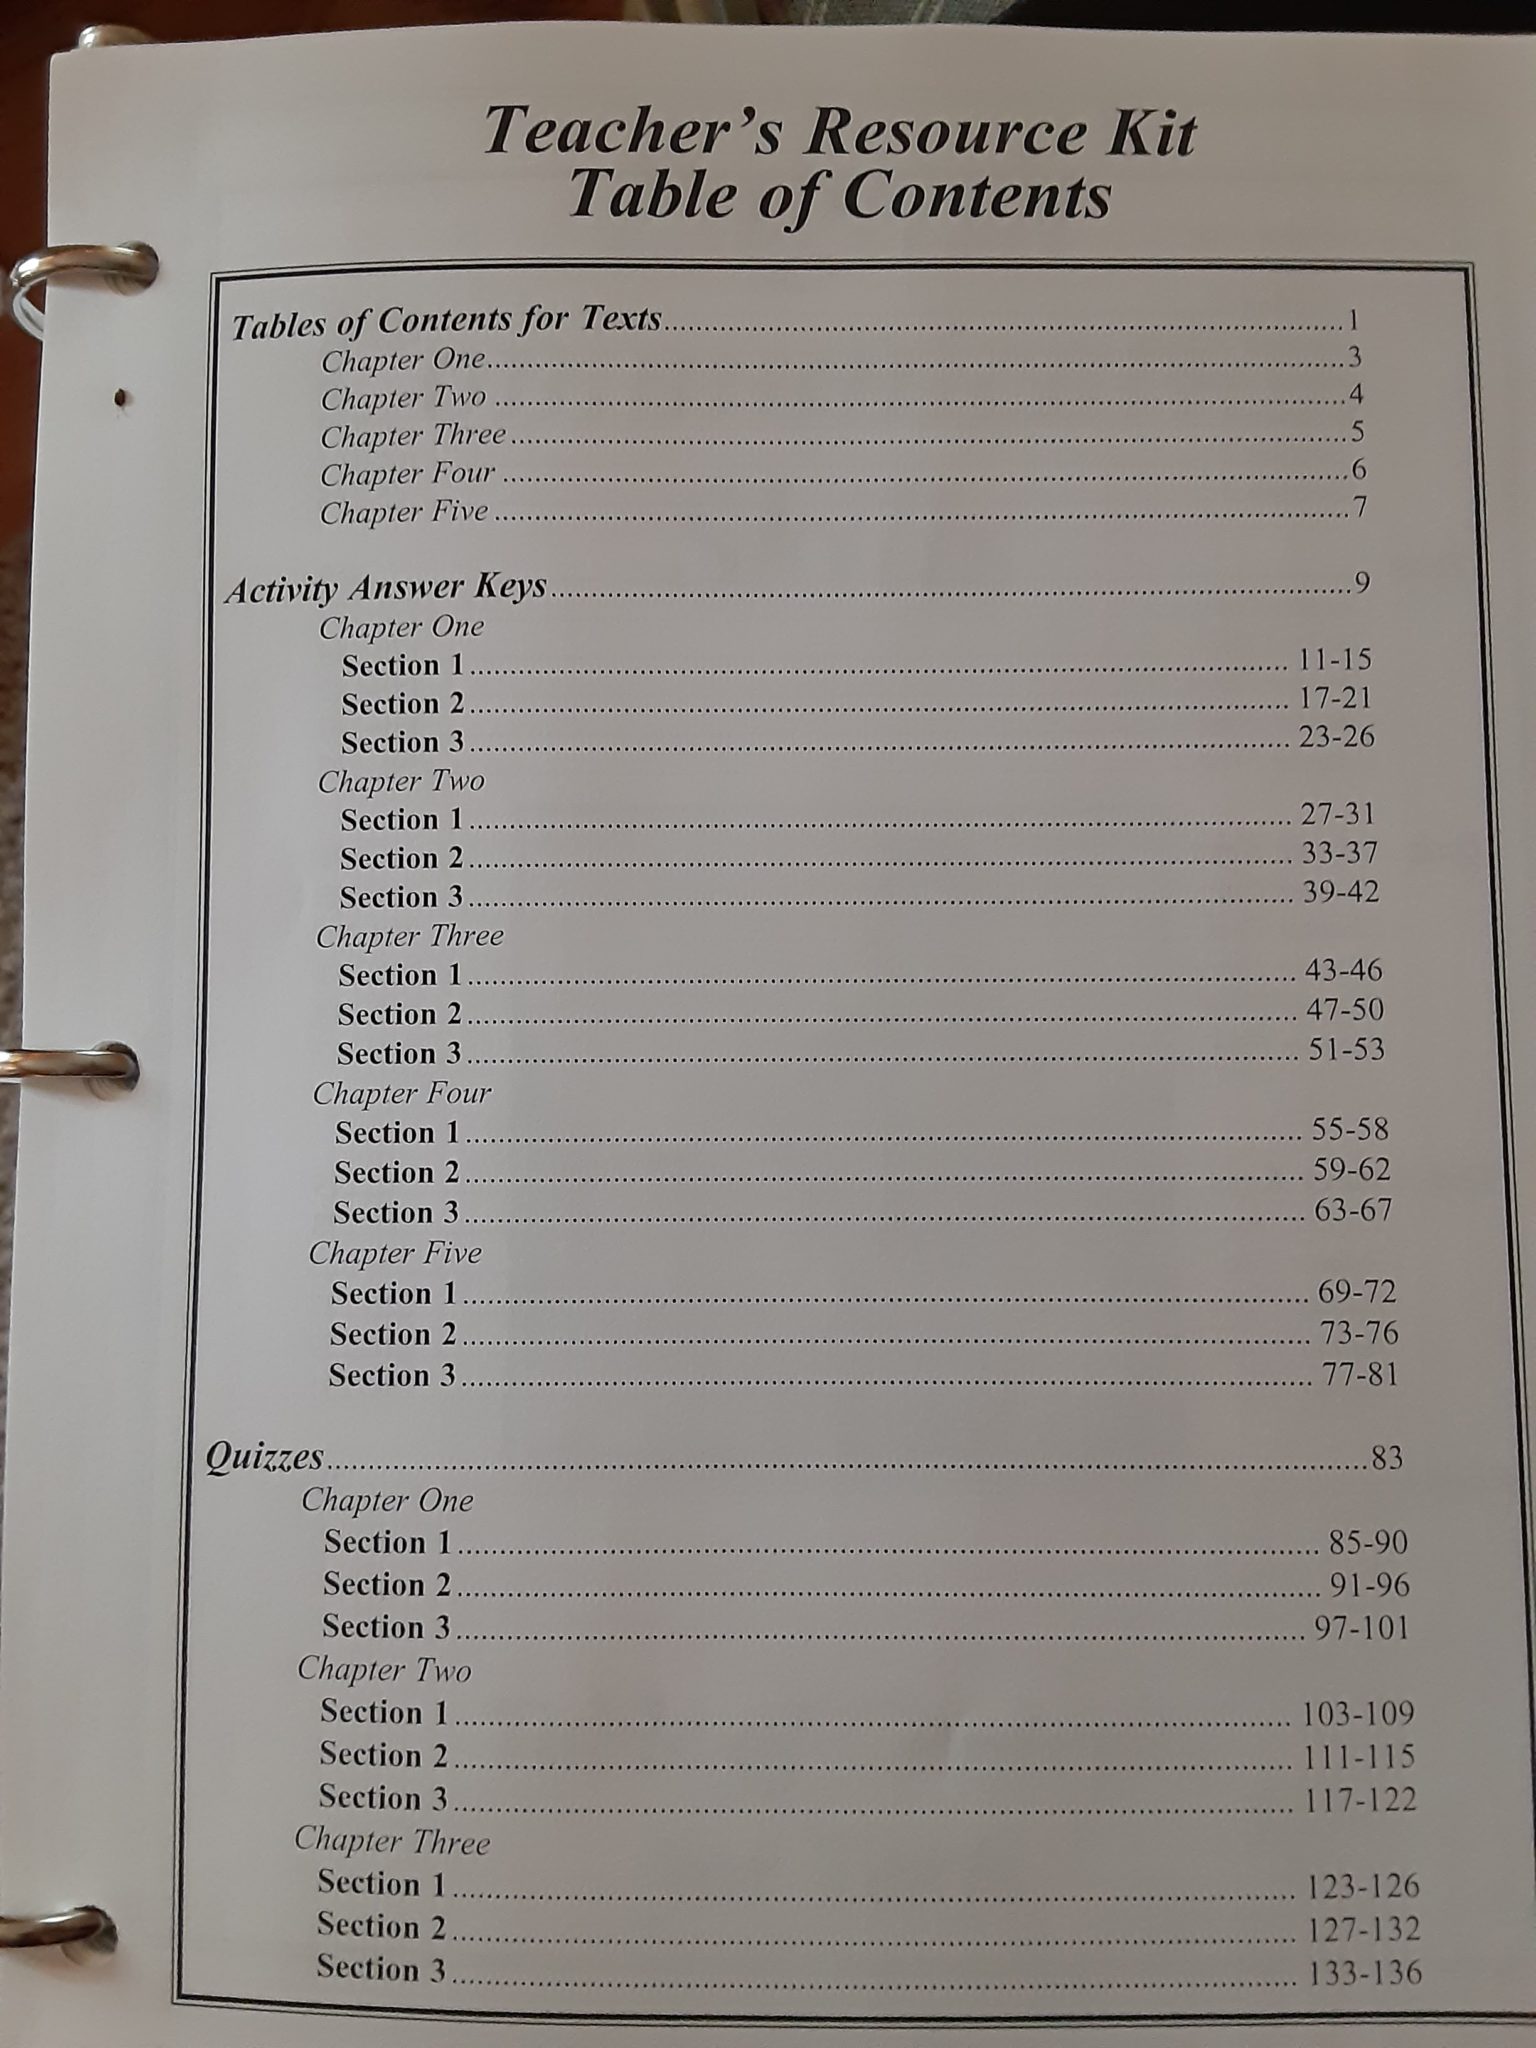 Table of Contents showing all parts of the Teacher Resource Kit